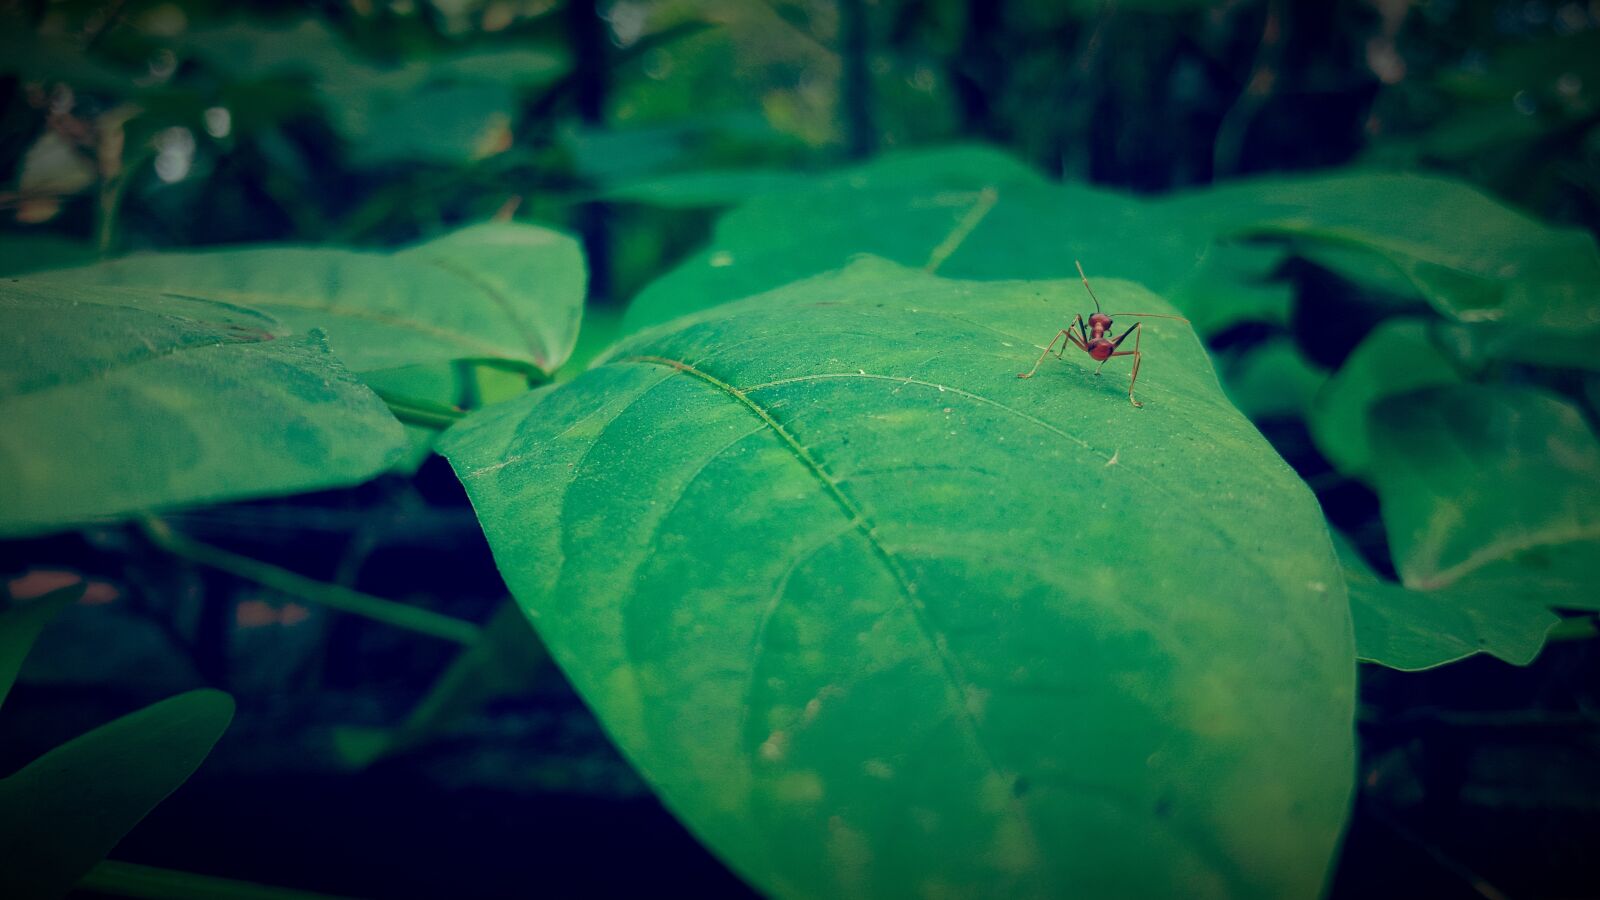 Samsung Galaxy S6 sample photo. Weaver ant, green leaf photography